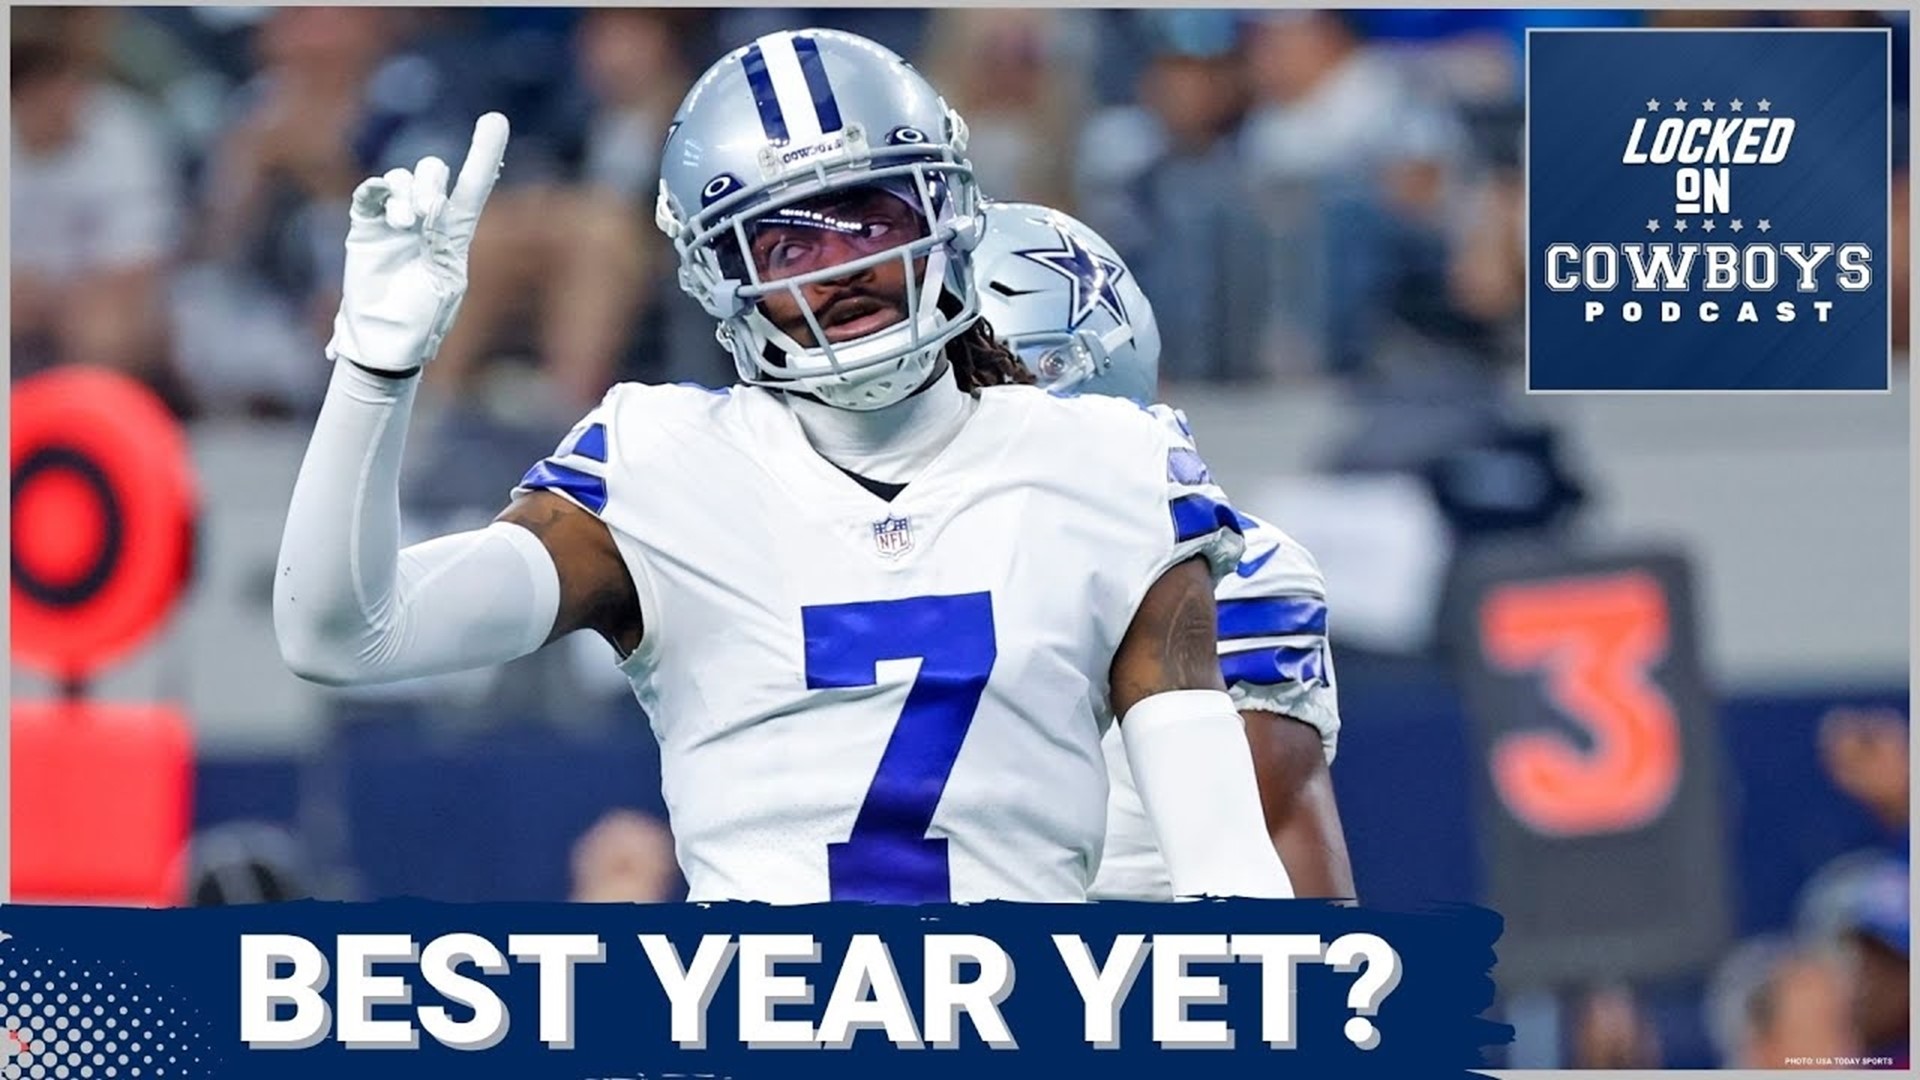 Marcus Mosher and Landon McCool rank the top five defensive players for the Dallas Cowboys heading into the 2023 season.